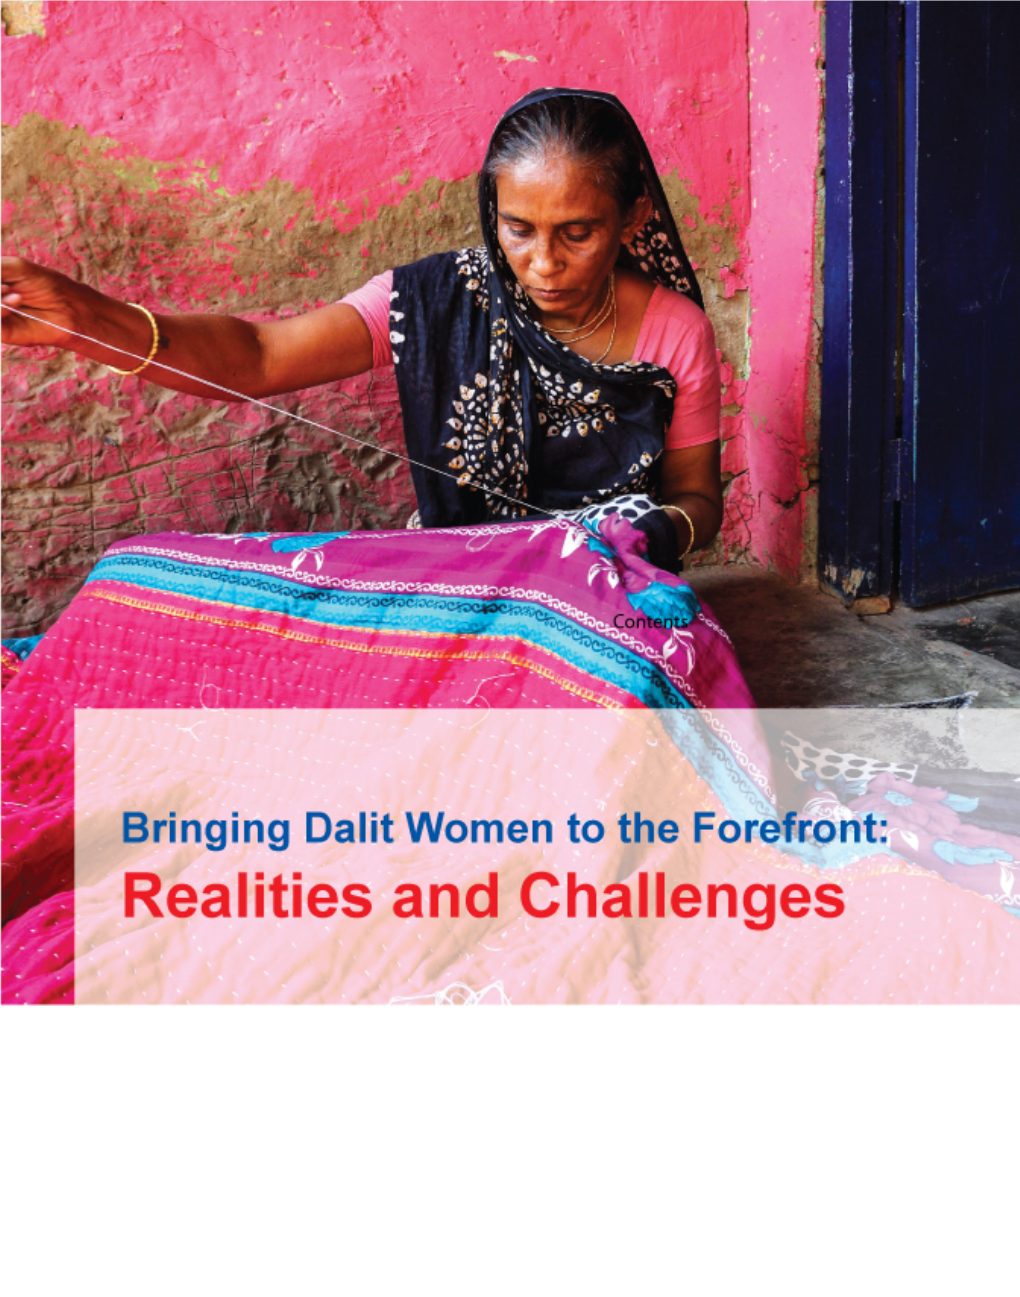 Bringing Dalit Women to the Forefront: Realities and Challenges